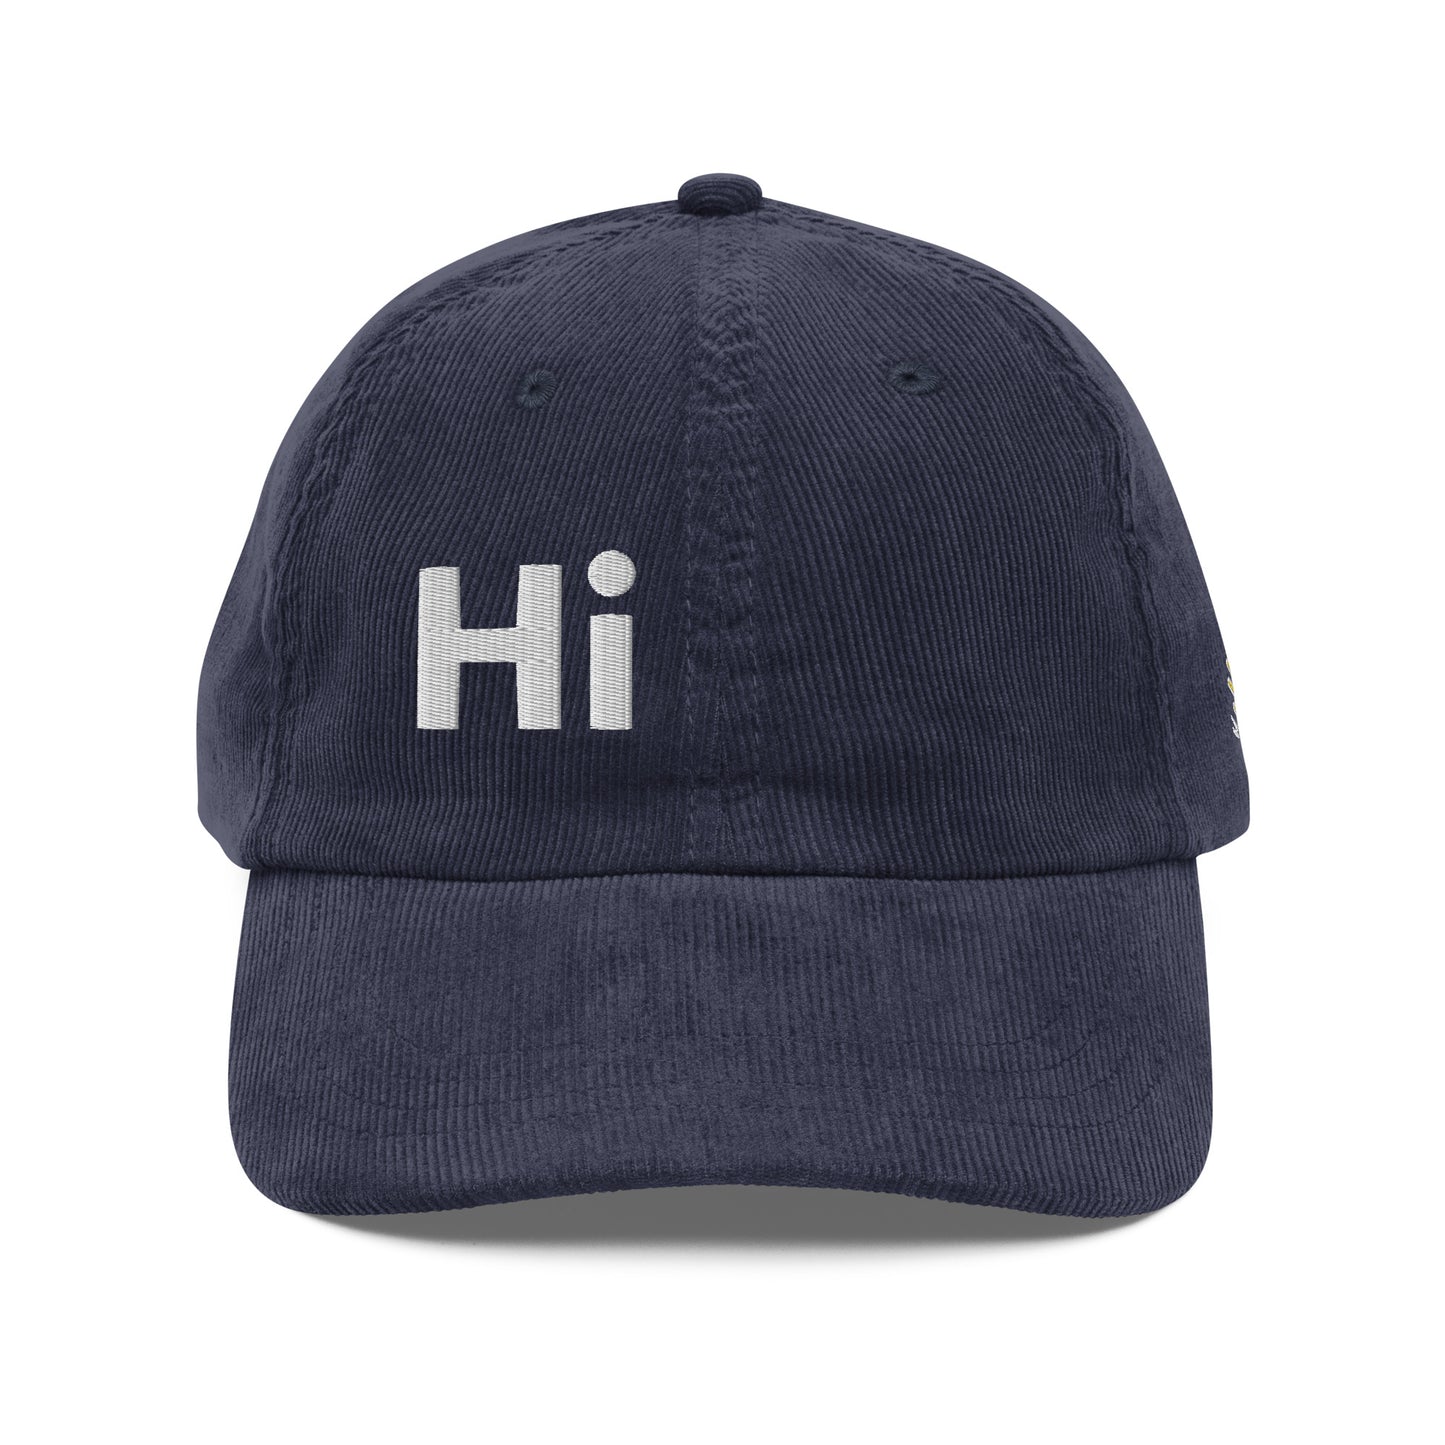 Hi Shalom Hebrew Corduroy Hat by Happy interactions in Navy